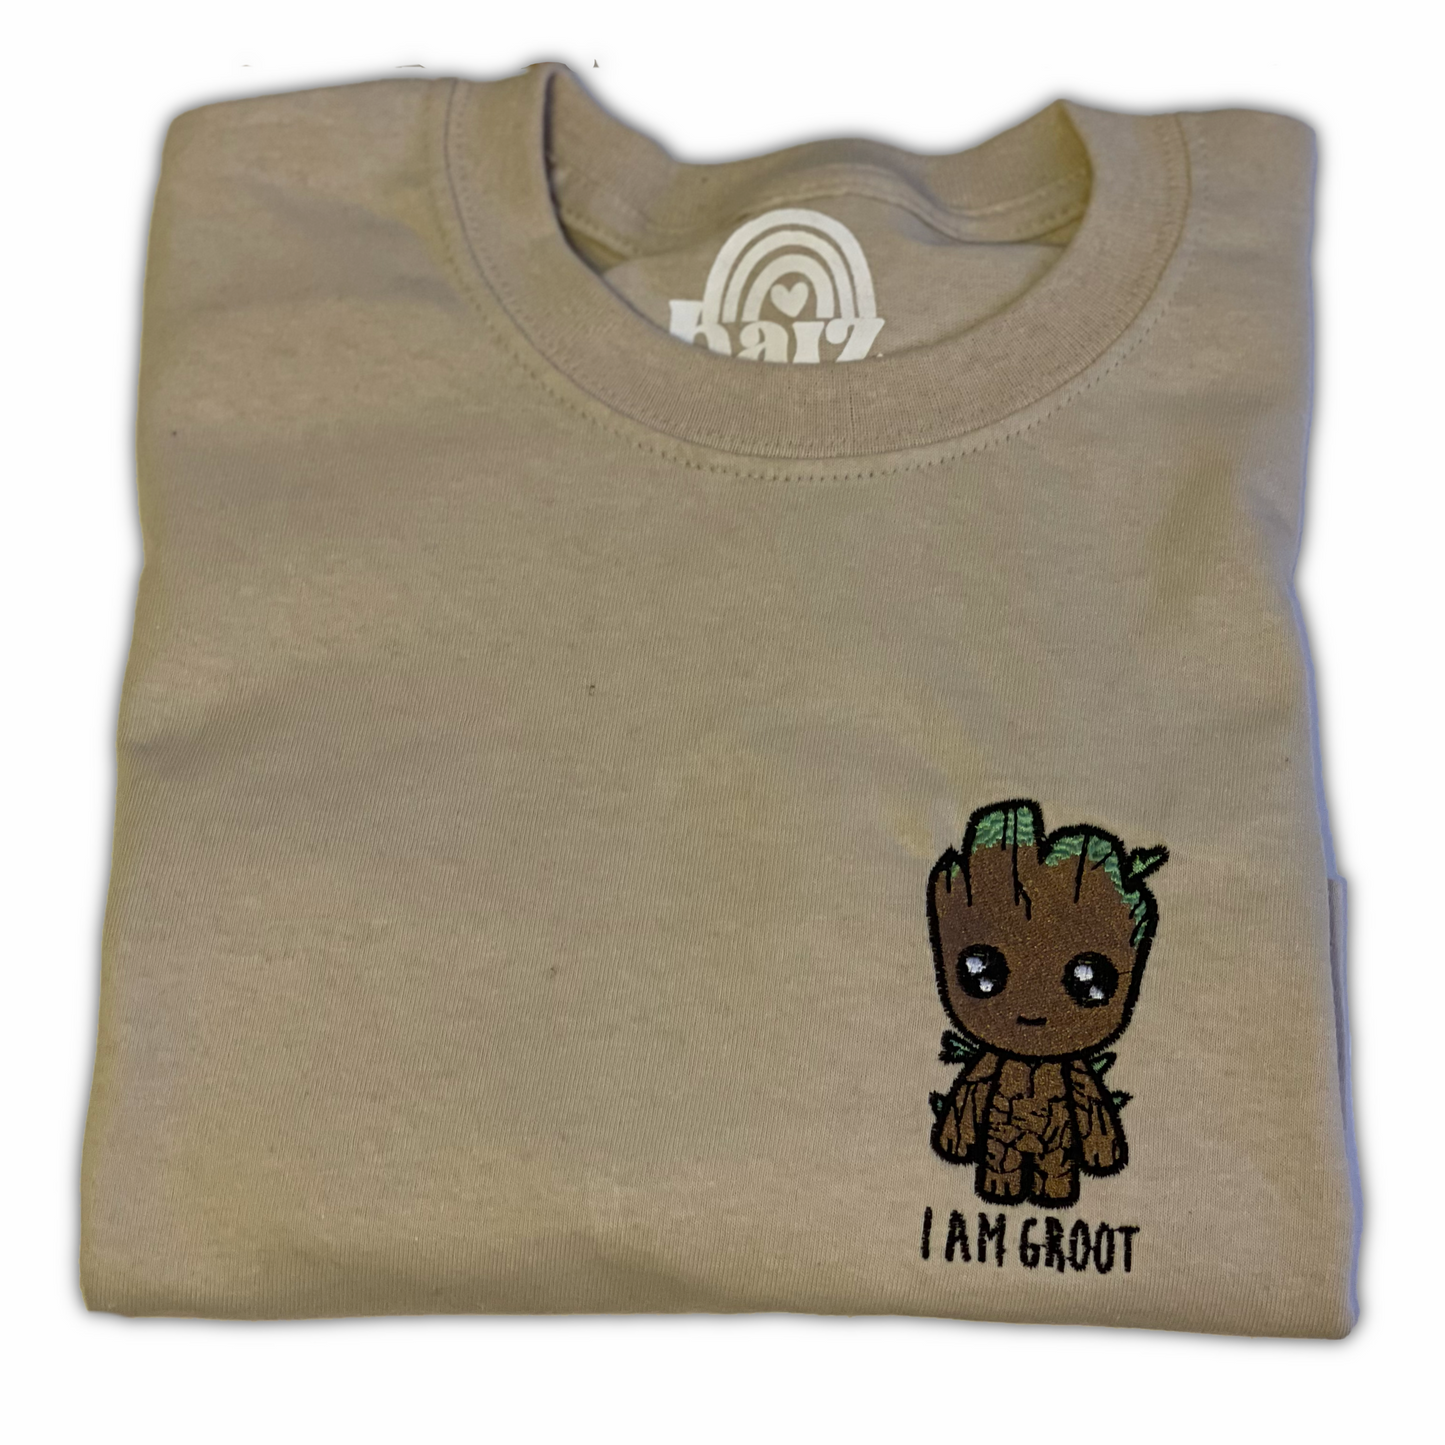 I am embroidered t-shirt